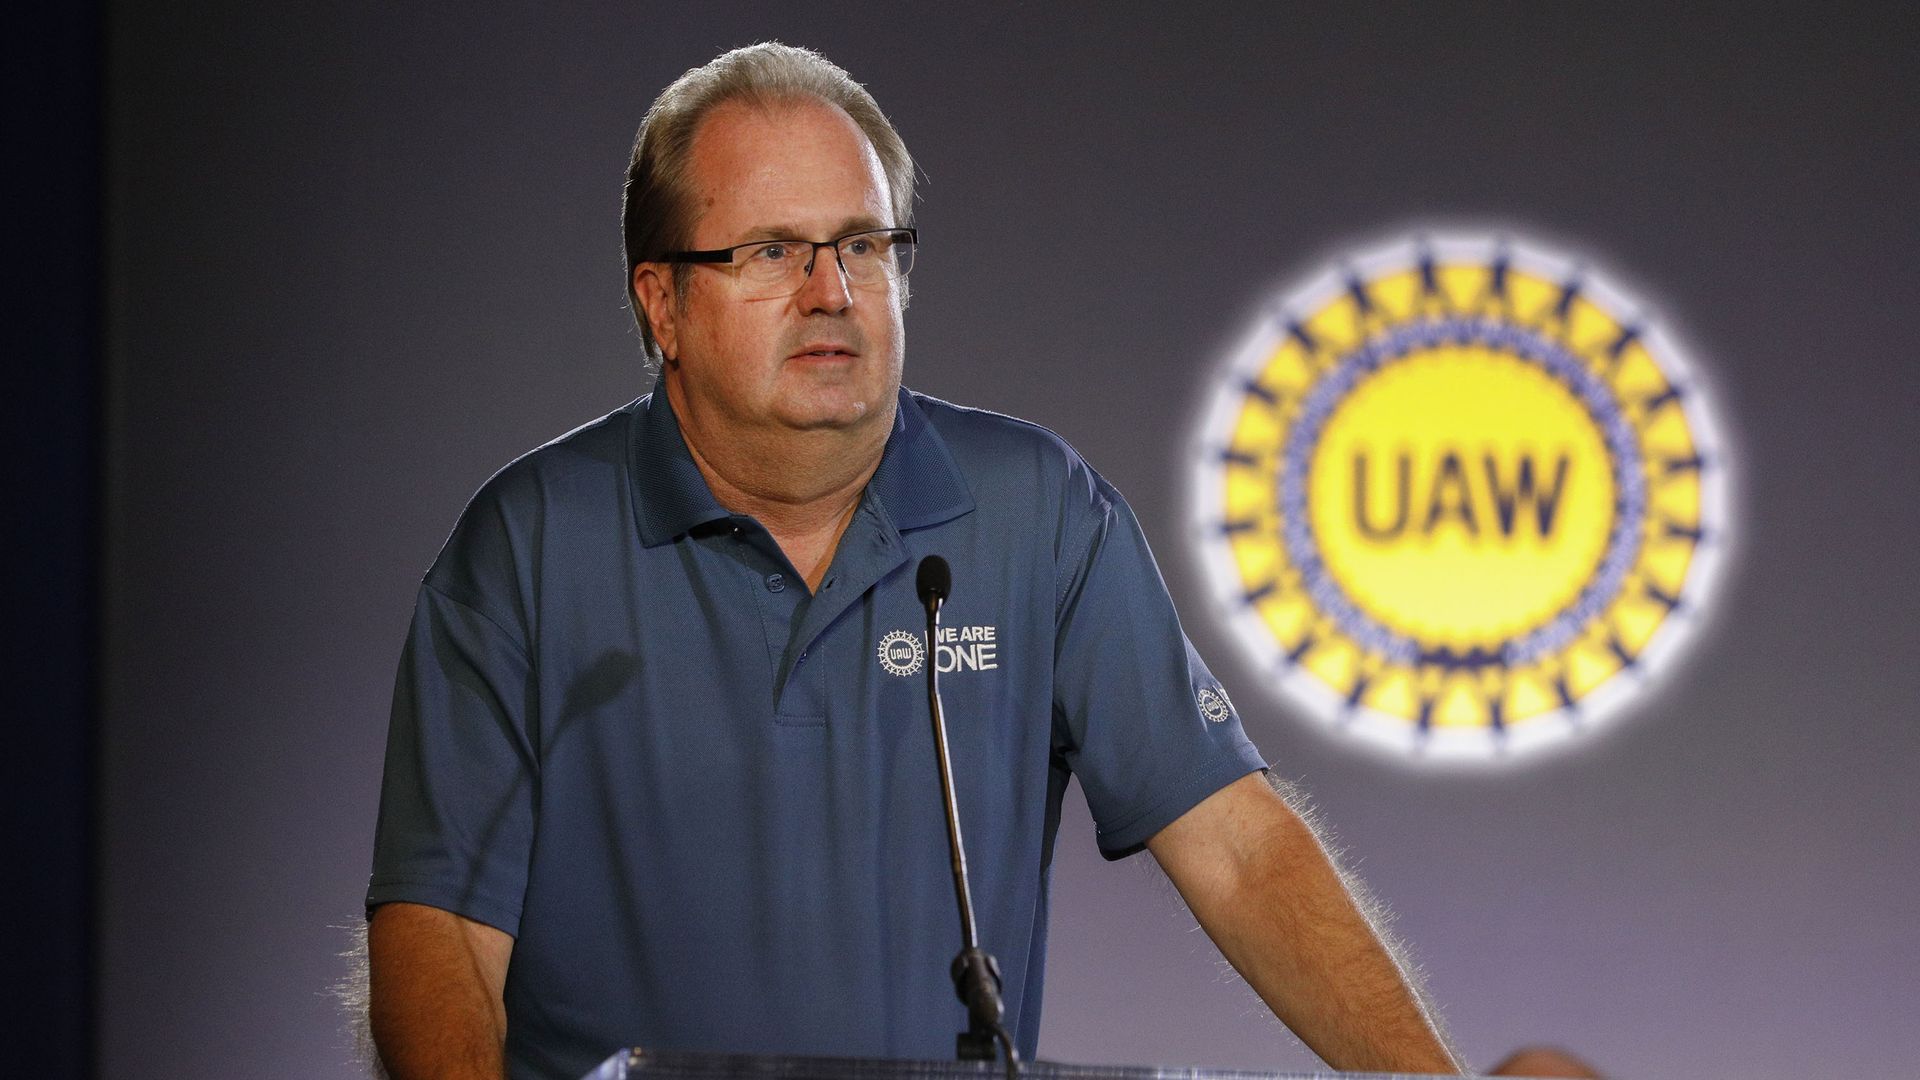 In this image, UAW president stands in front of a clear plastic podium.